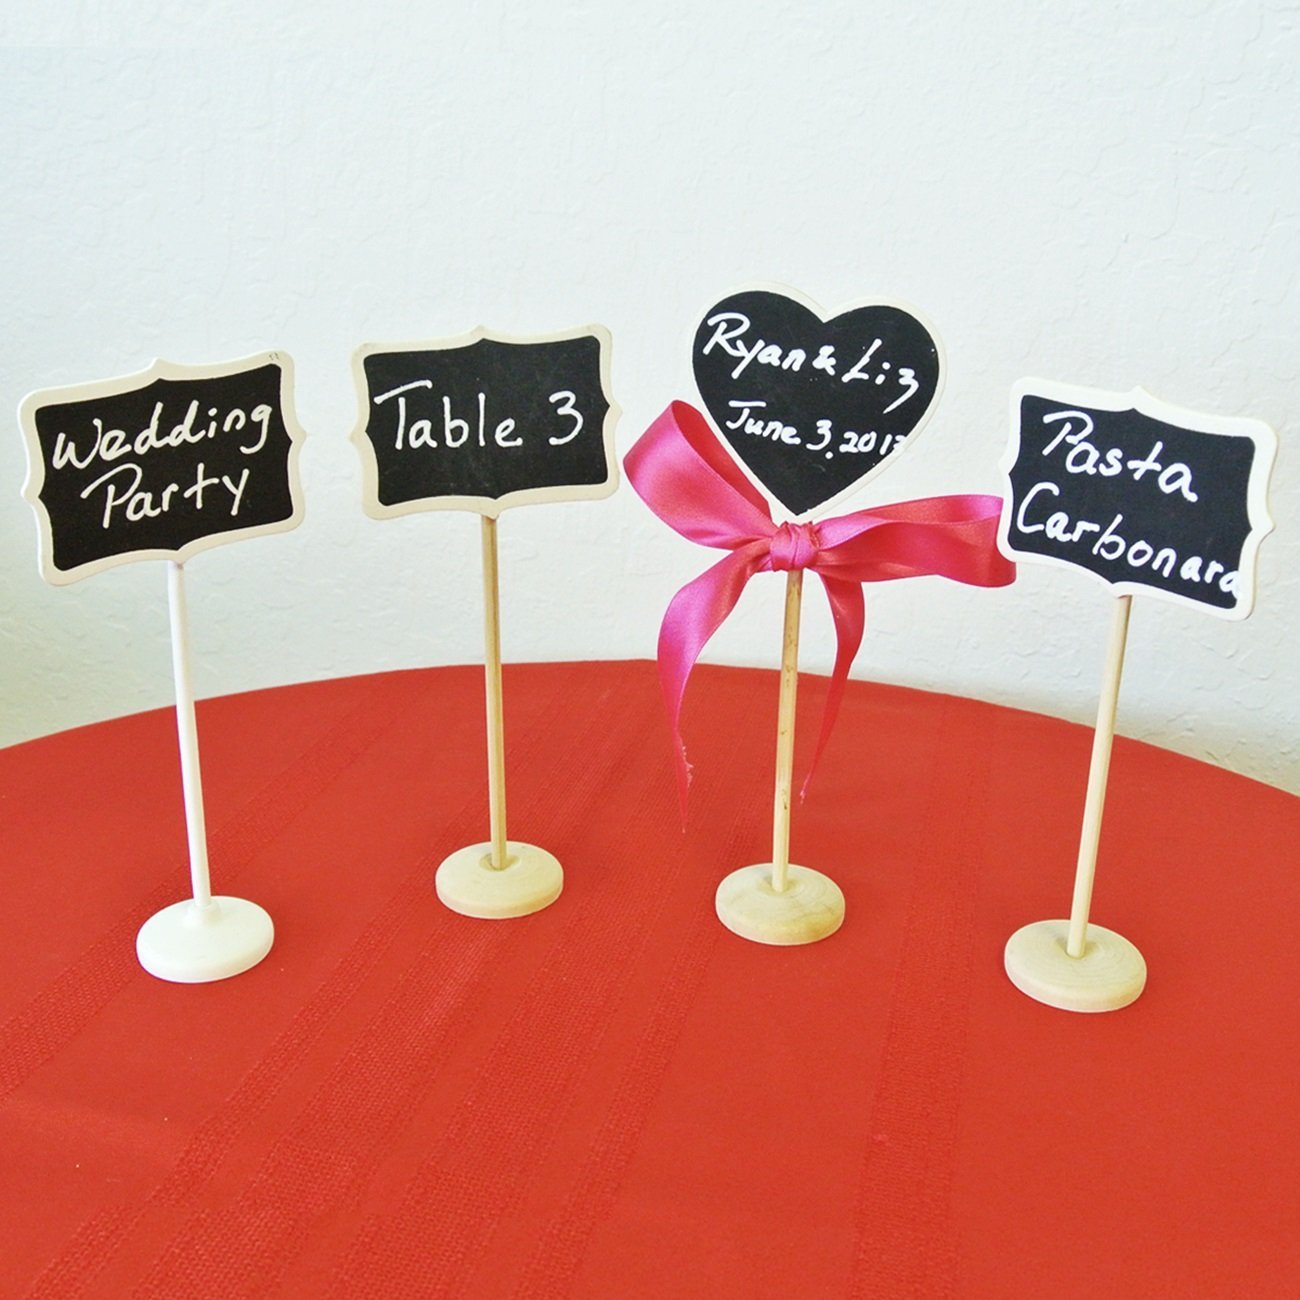 Mini Chalkboard Tag with Stand for Wedding and Party Table Markers, Plant Markers, Party Favors (set of 6) ?V Rectangle